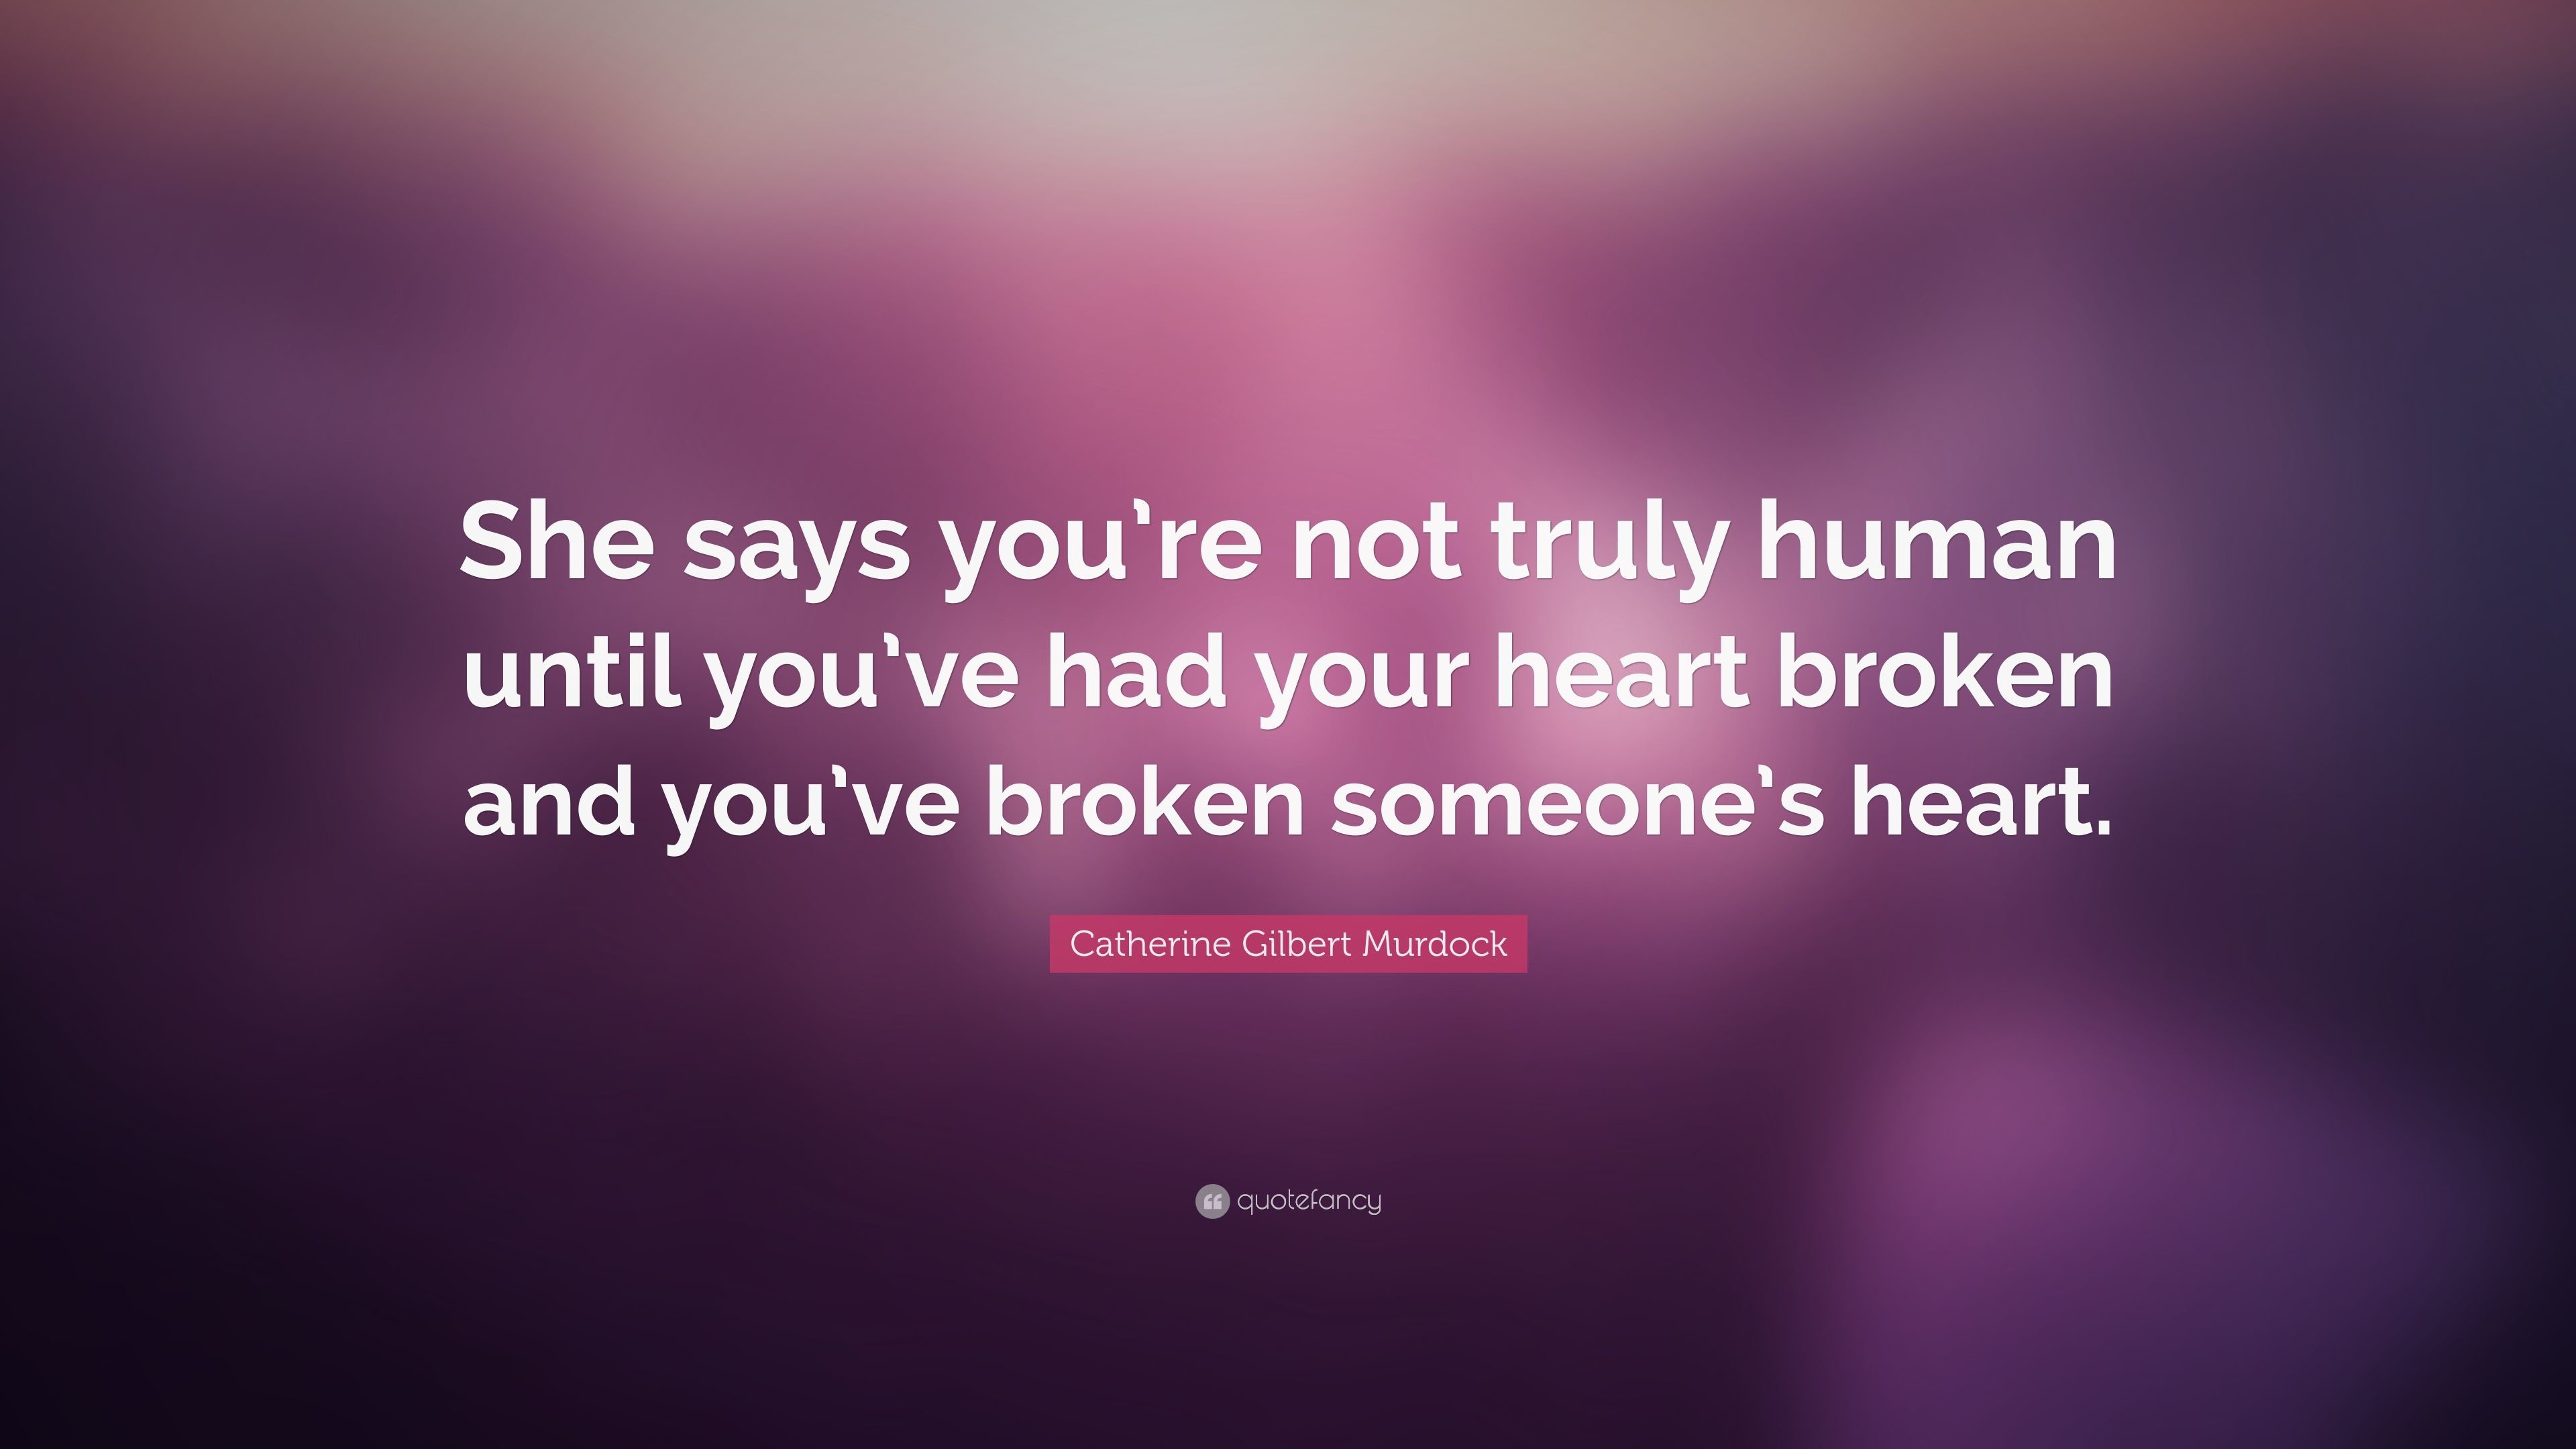 3840x2160 Catherine Gilbert Murdock Quote: “She says you're not truly human until you